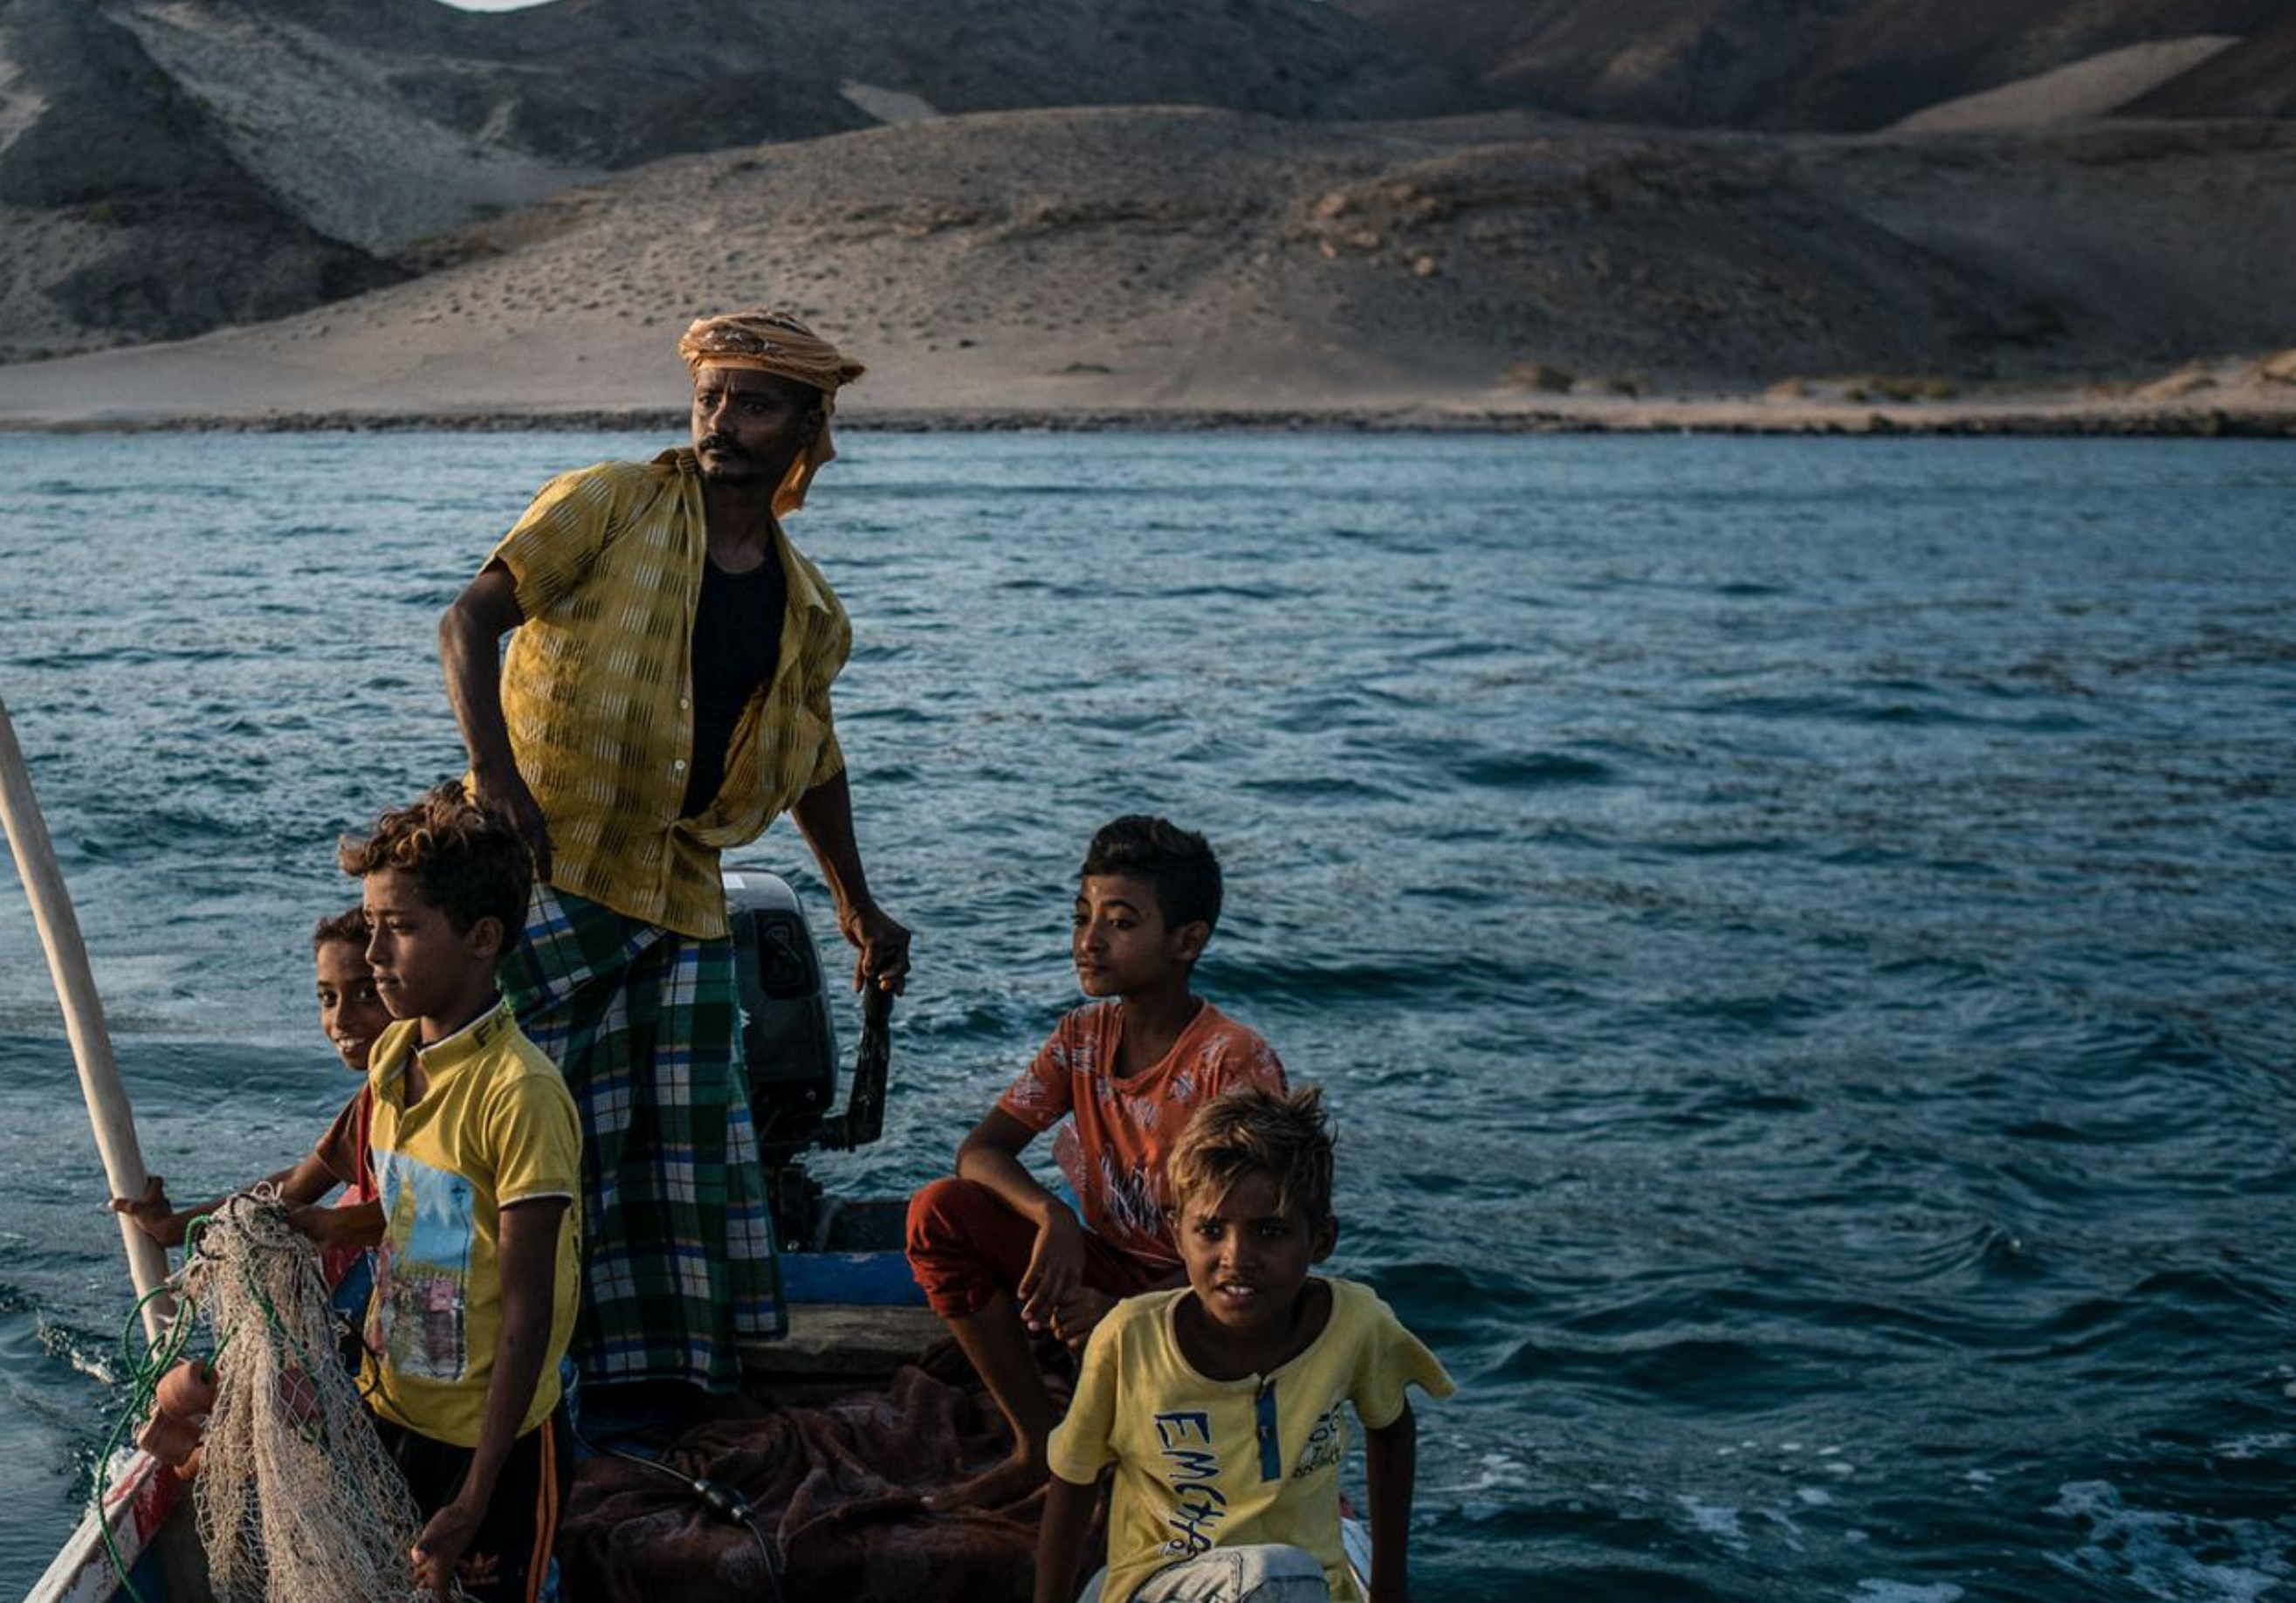 Shafai Saleh Hadi drives a friend's boat along the coast of Bir Fuqum, searching for fish with his sons. Image by Alex Potter. Yemen, 2018.